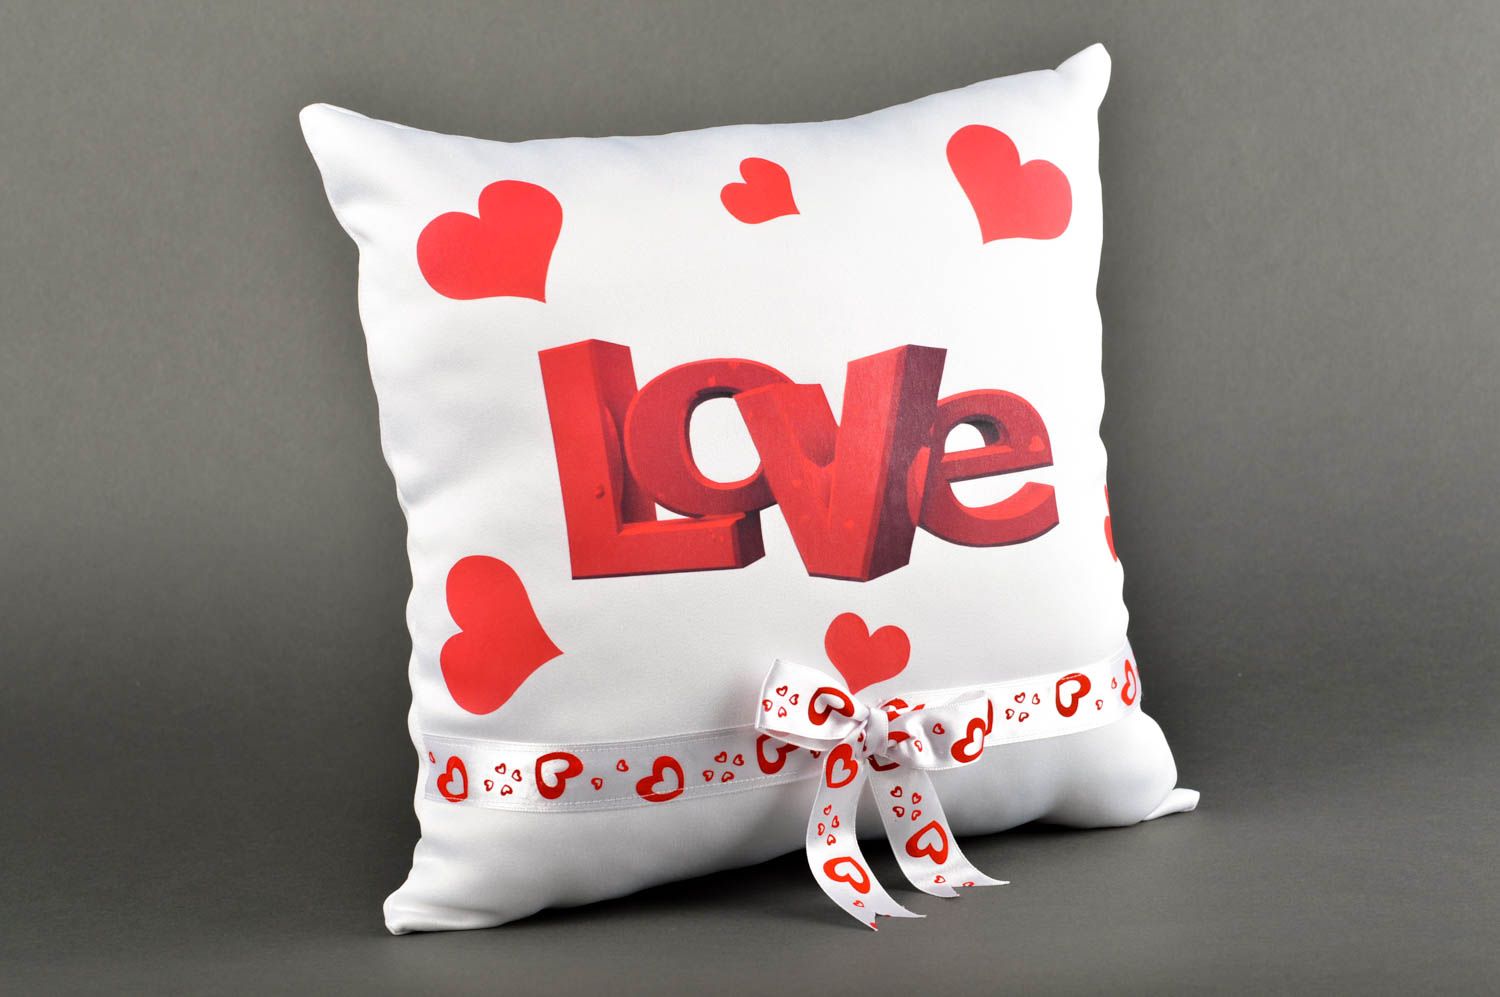 Handmade decorative pillow accent pillow designer cushions home decor cool gifts photo 3